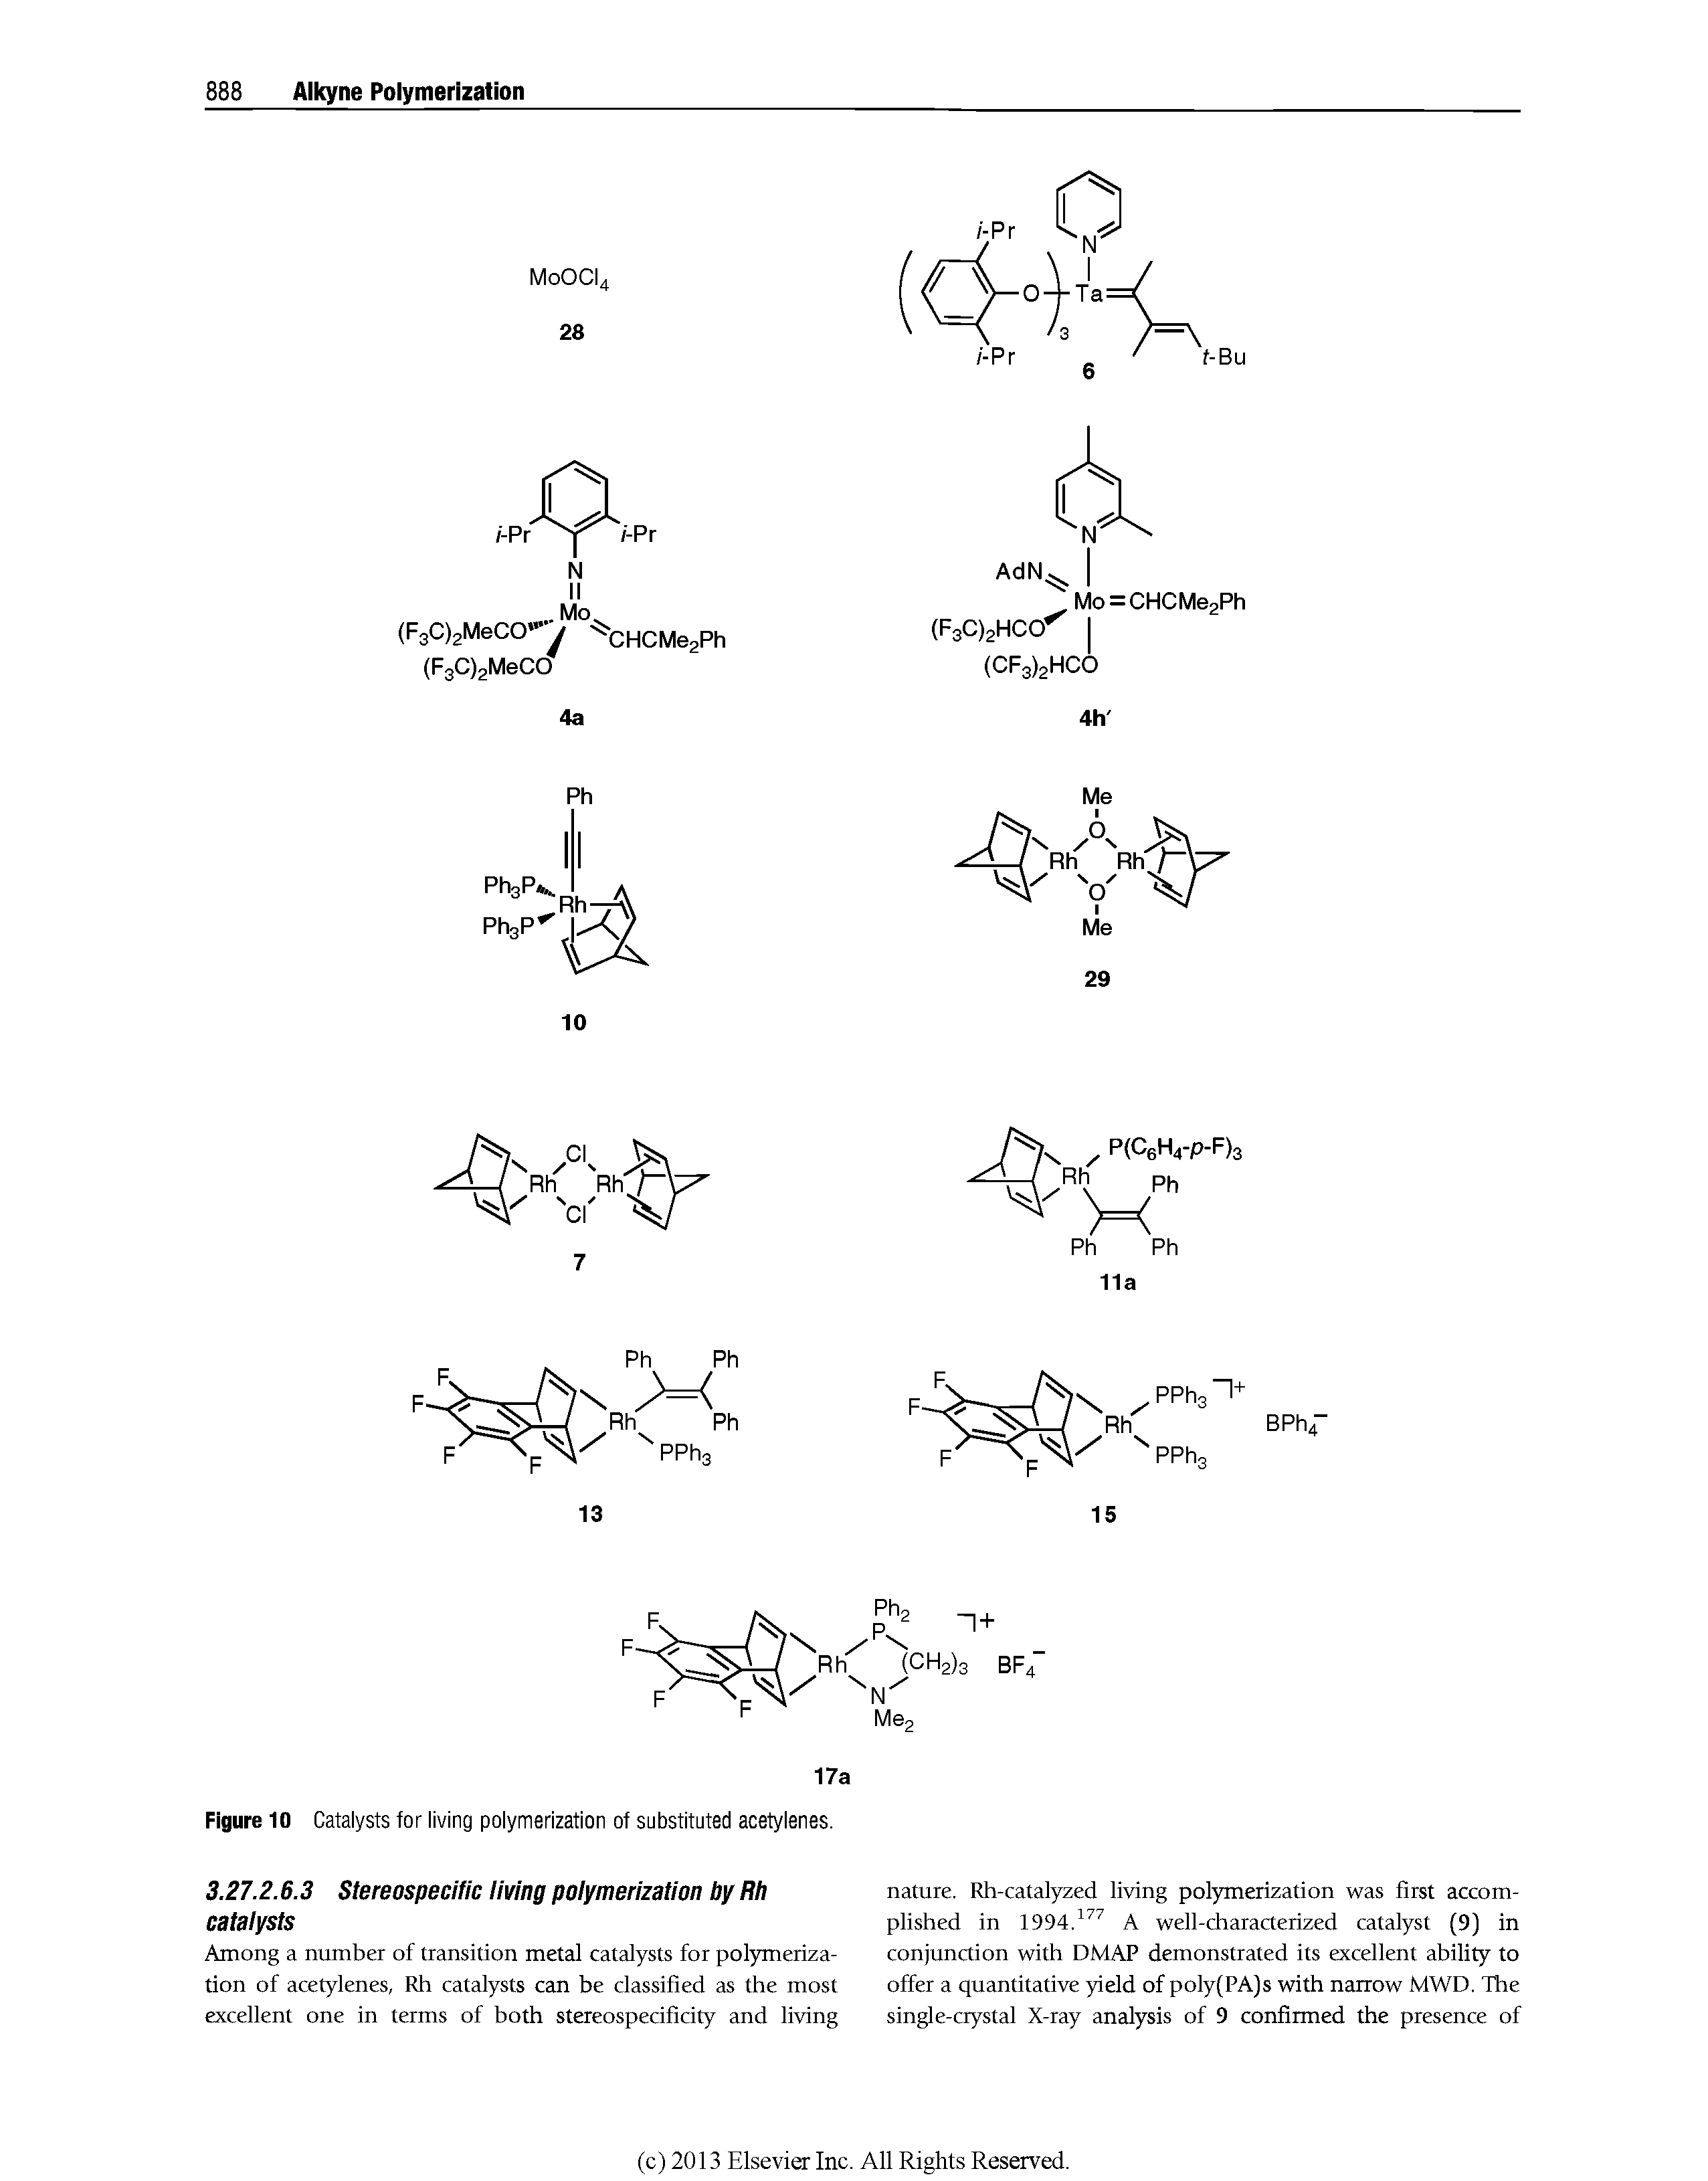 Figure 10 Catalysts for living polymerization of substituted acetylenes.